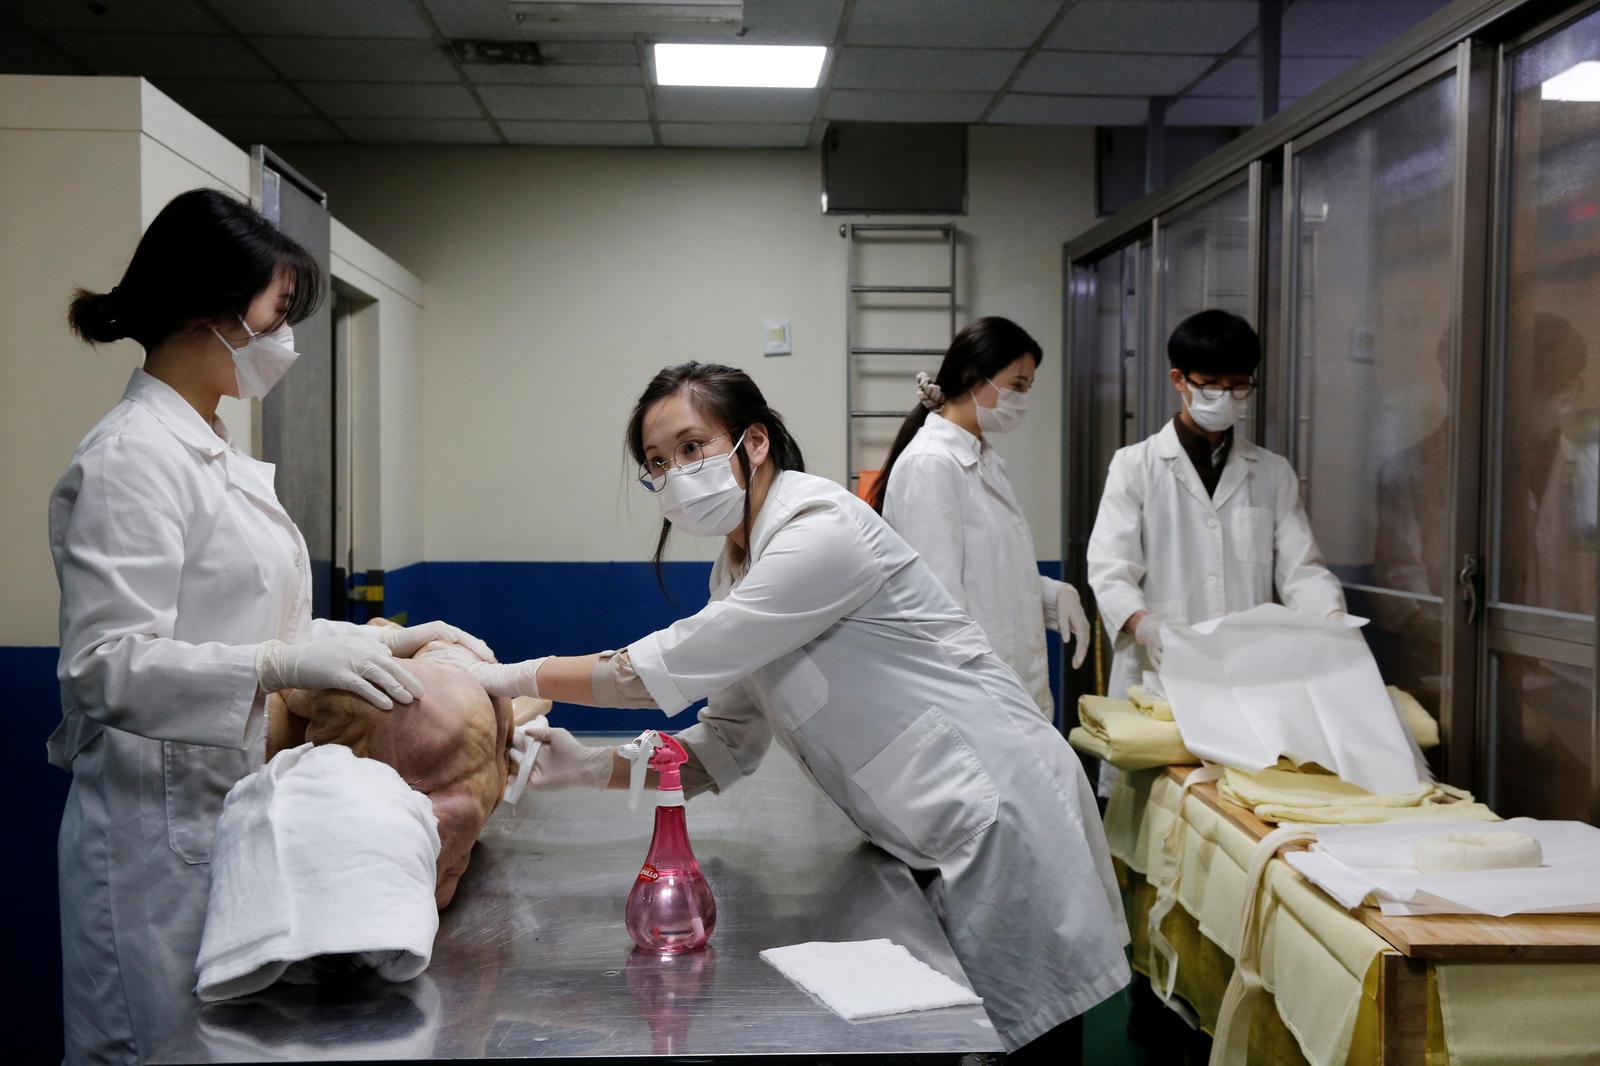 Park Bo-ram, a funeral director, cleans the body of a deceased at a funeral home in a medical center in Seoul, South Korea, November 4, 2020. Photo: Reuters